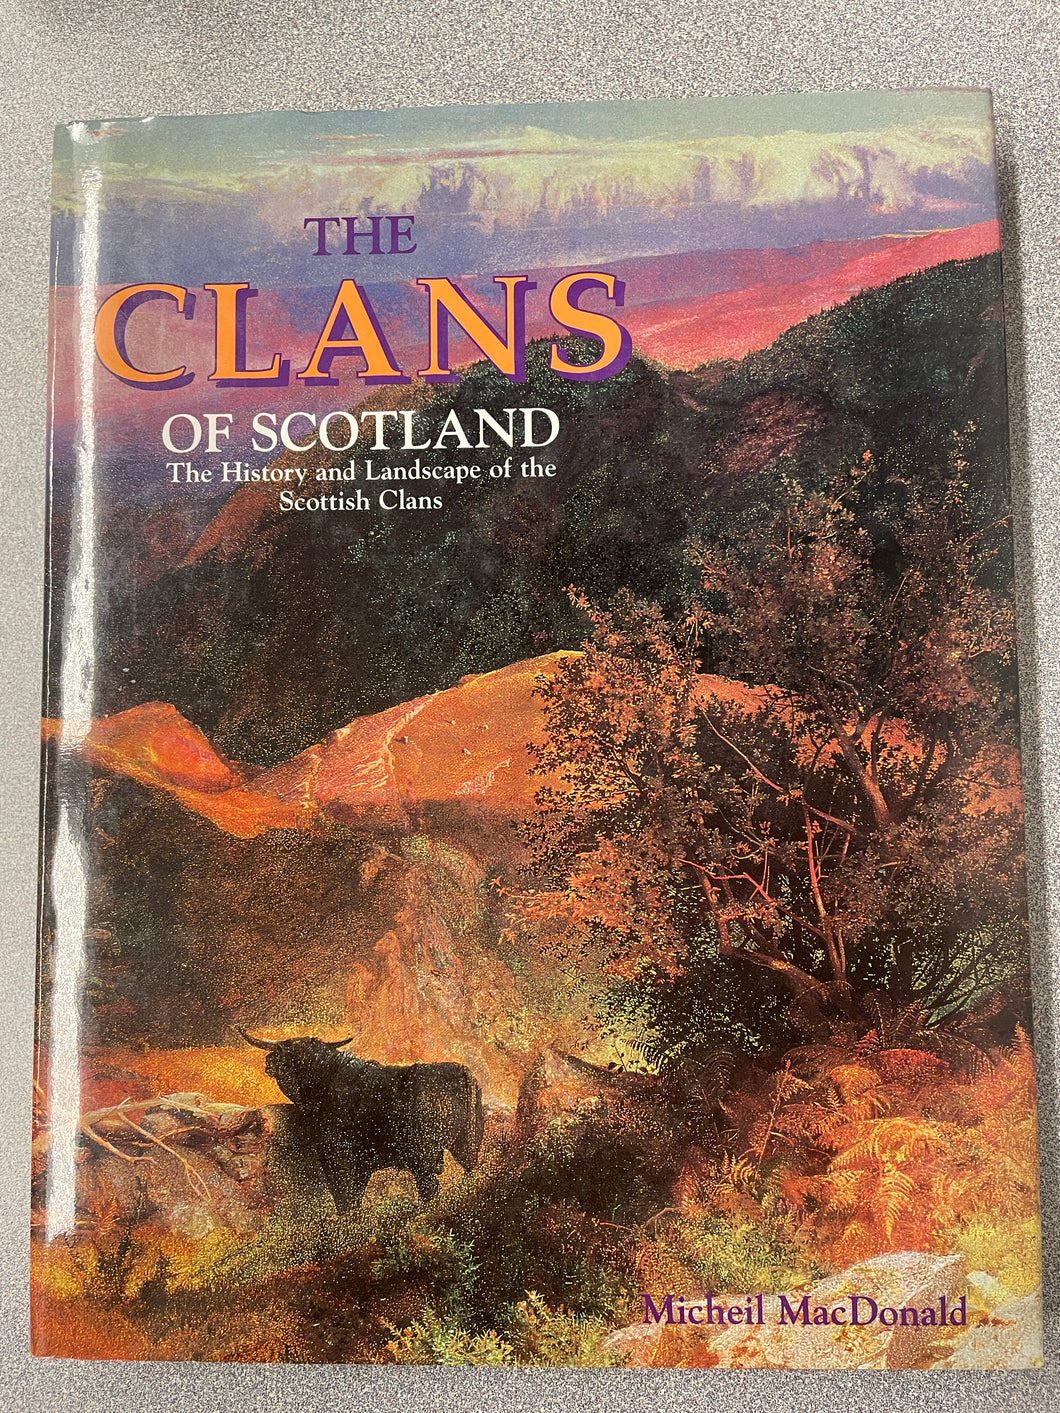 H  The Clans of Scotland: the History and Landscape of the Scottish Clans, MacDonald, Micheil [1994] N 4/24